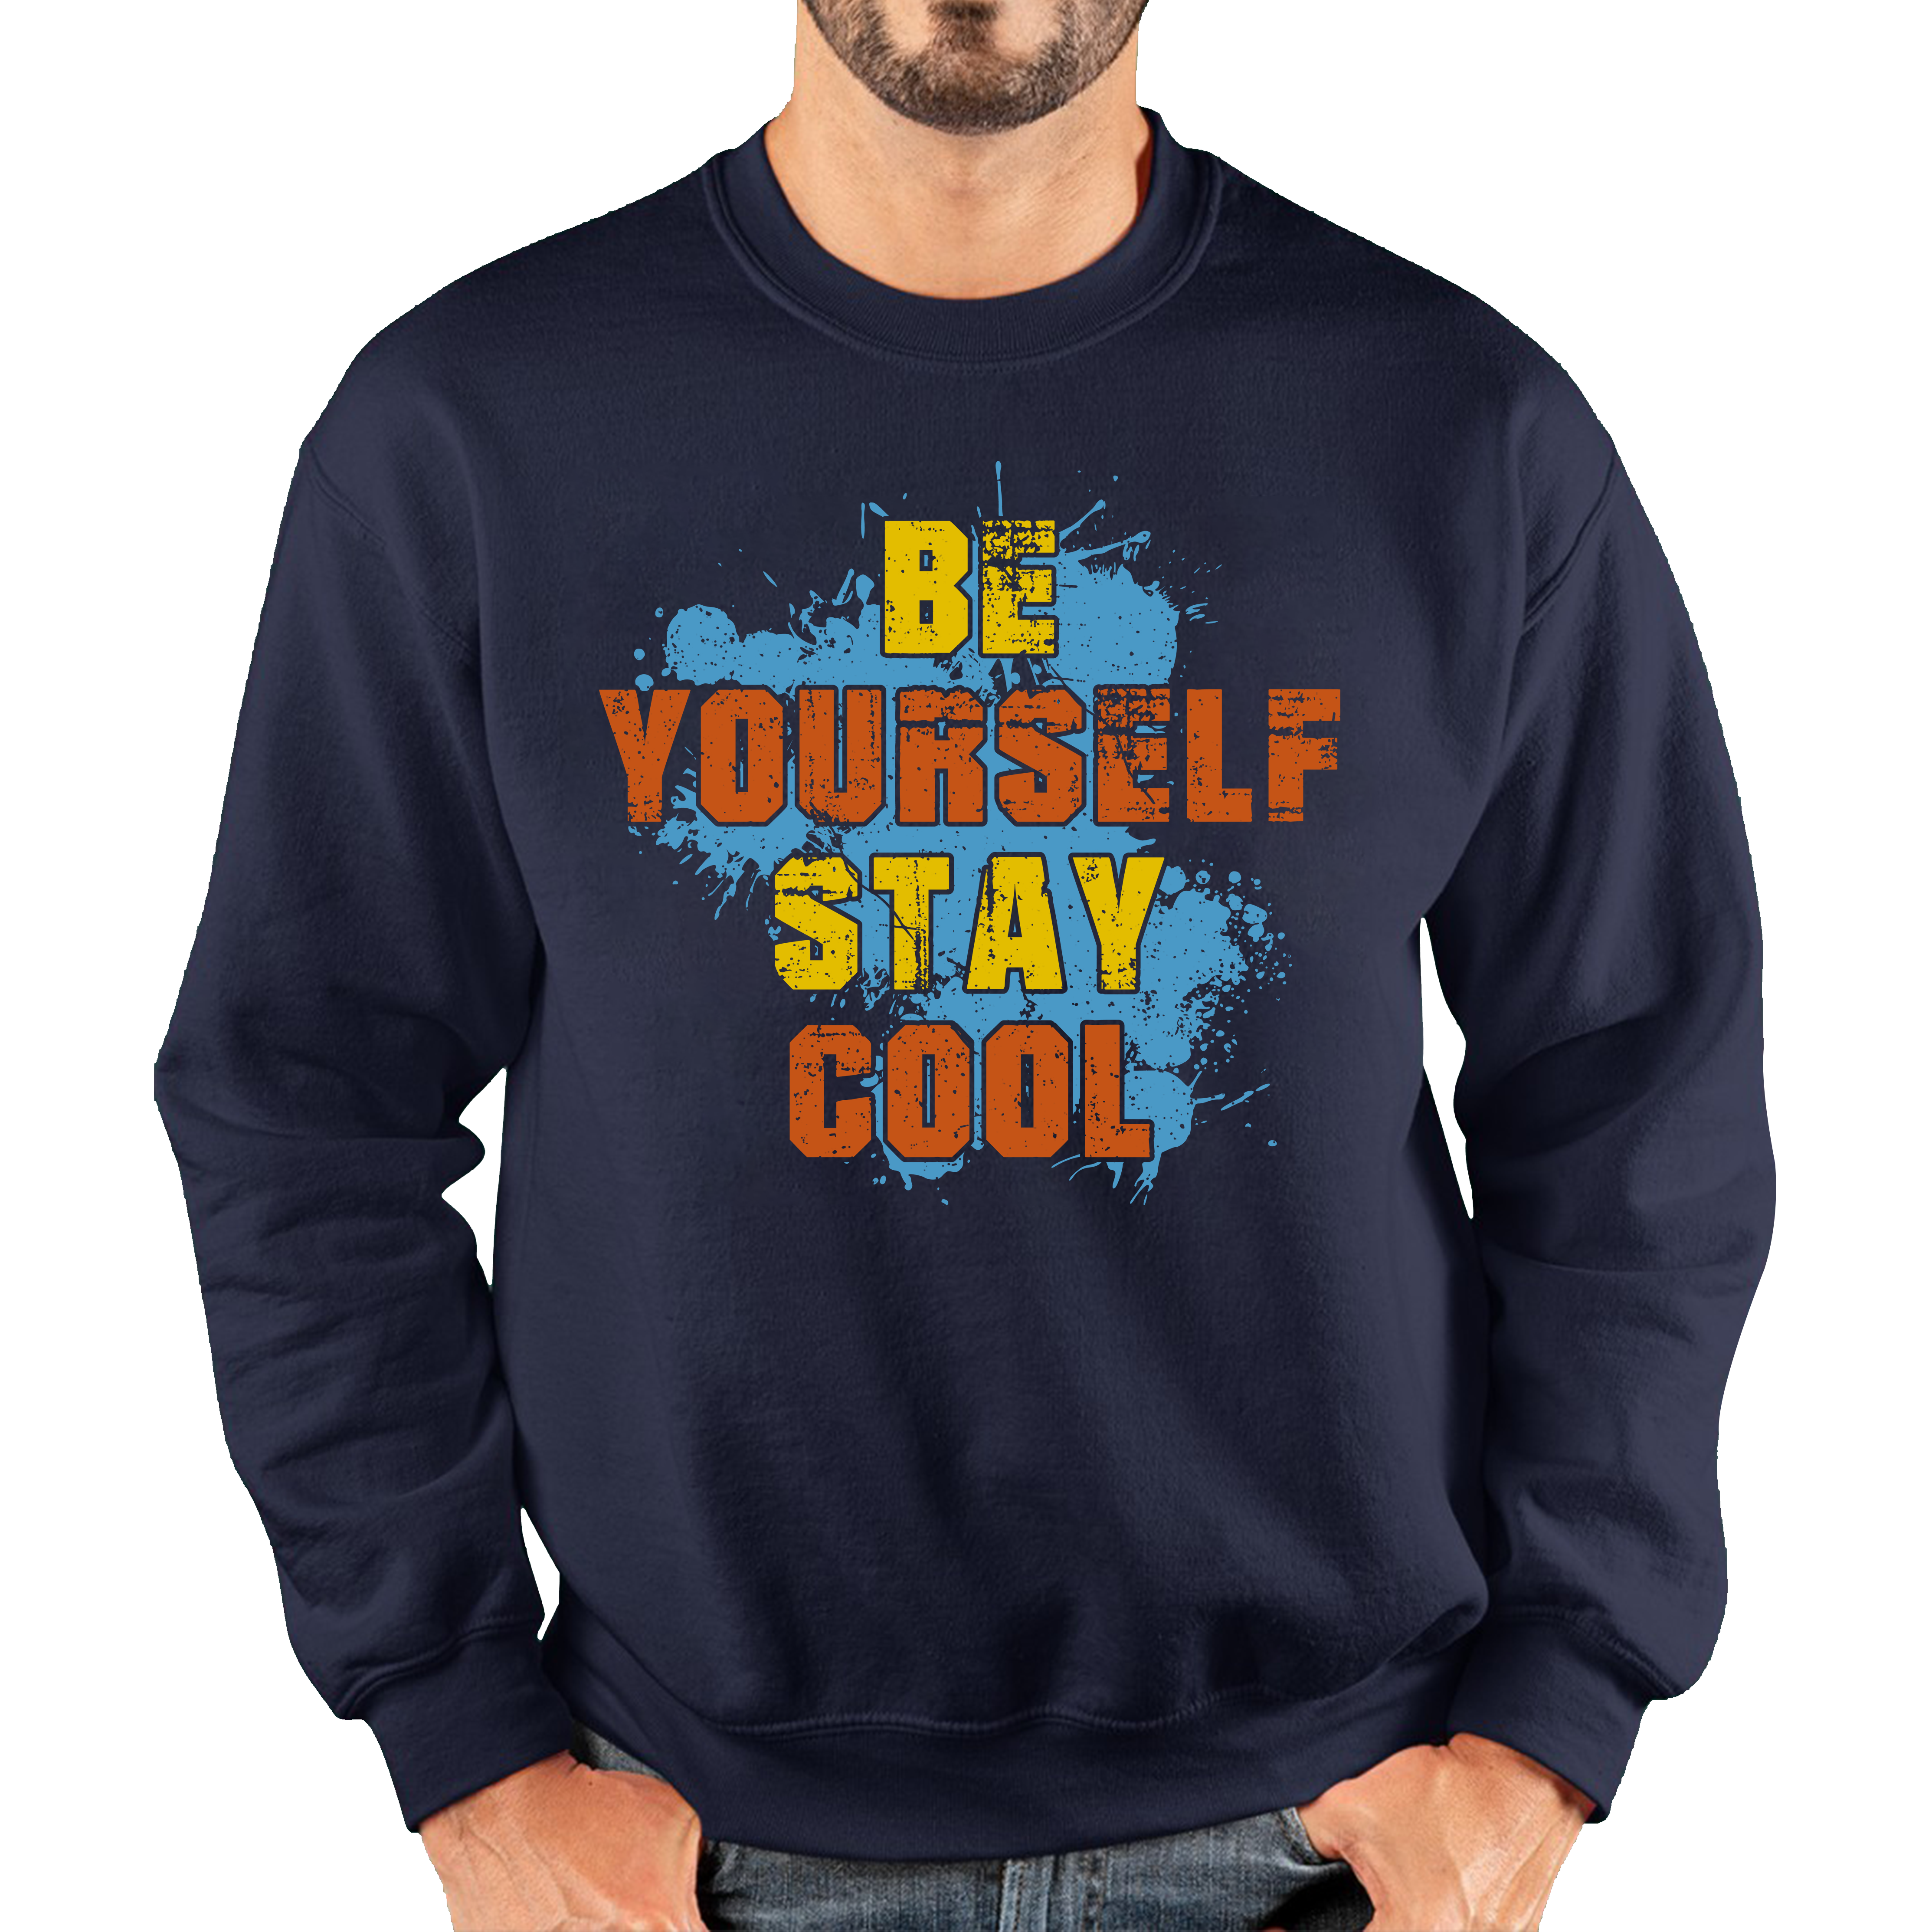 Be Yourself Stay Cool Jumper Inspirational Motivational Quote Unisex Sweatshirt